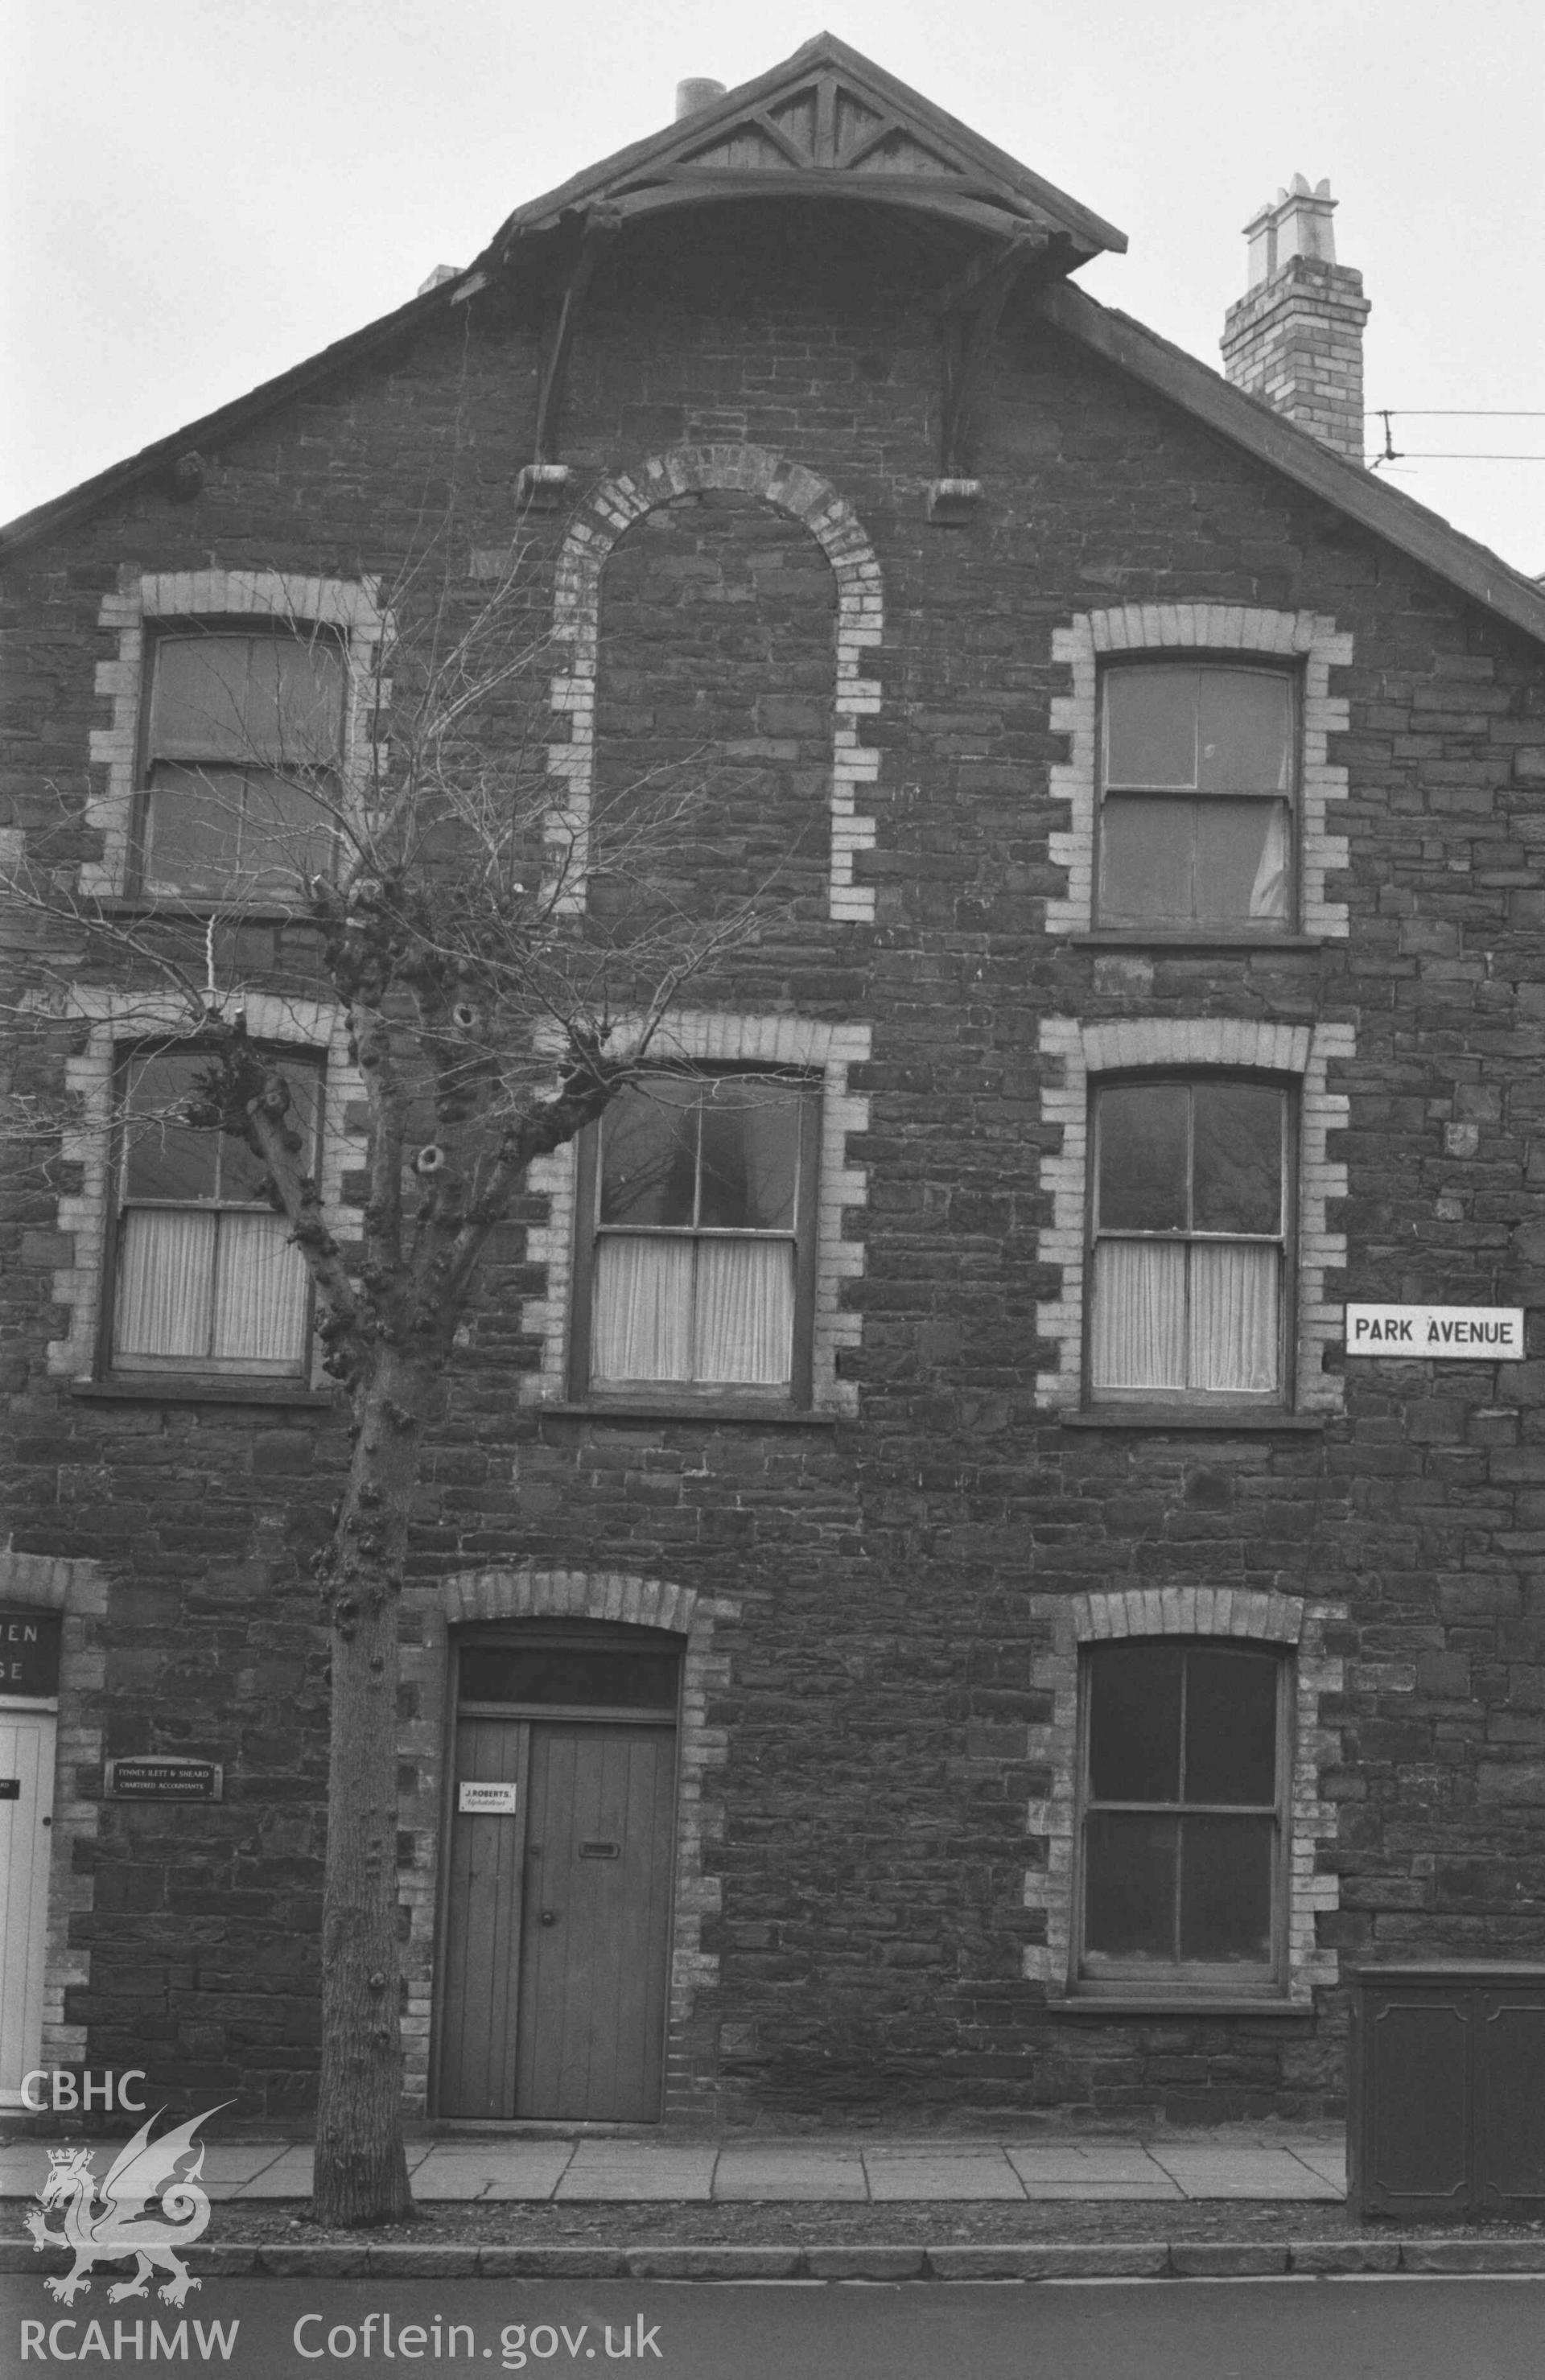 Digital copy of a black and white negative showing Bronwen House, Aberystwyth. Photographed by Arthur Chater on 3 January 1969. Looking south west from Grid Reference SN 5844 8154.